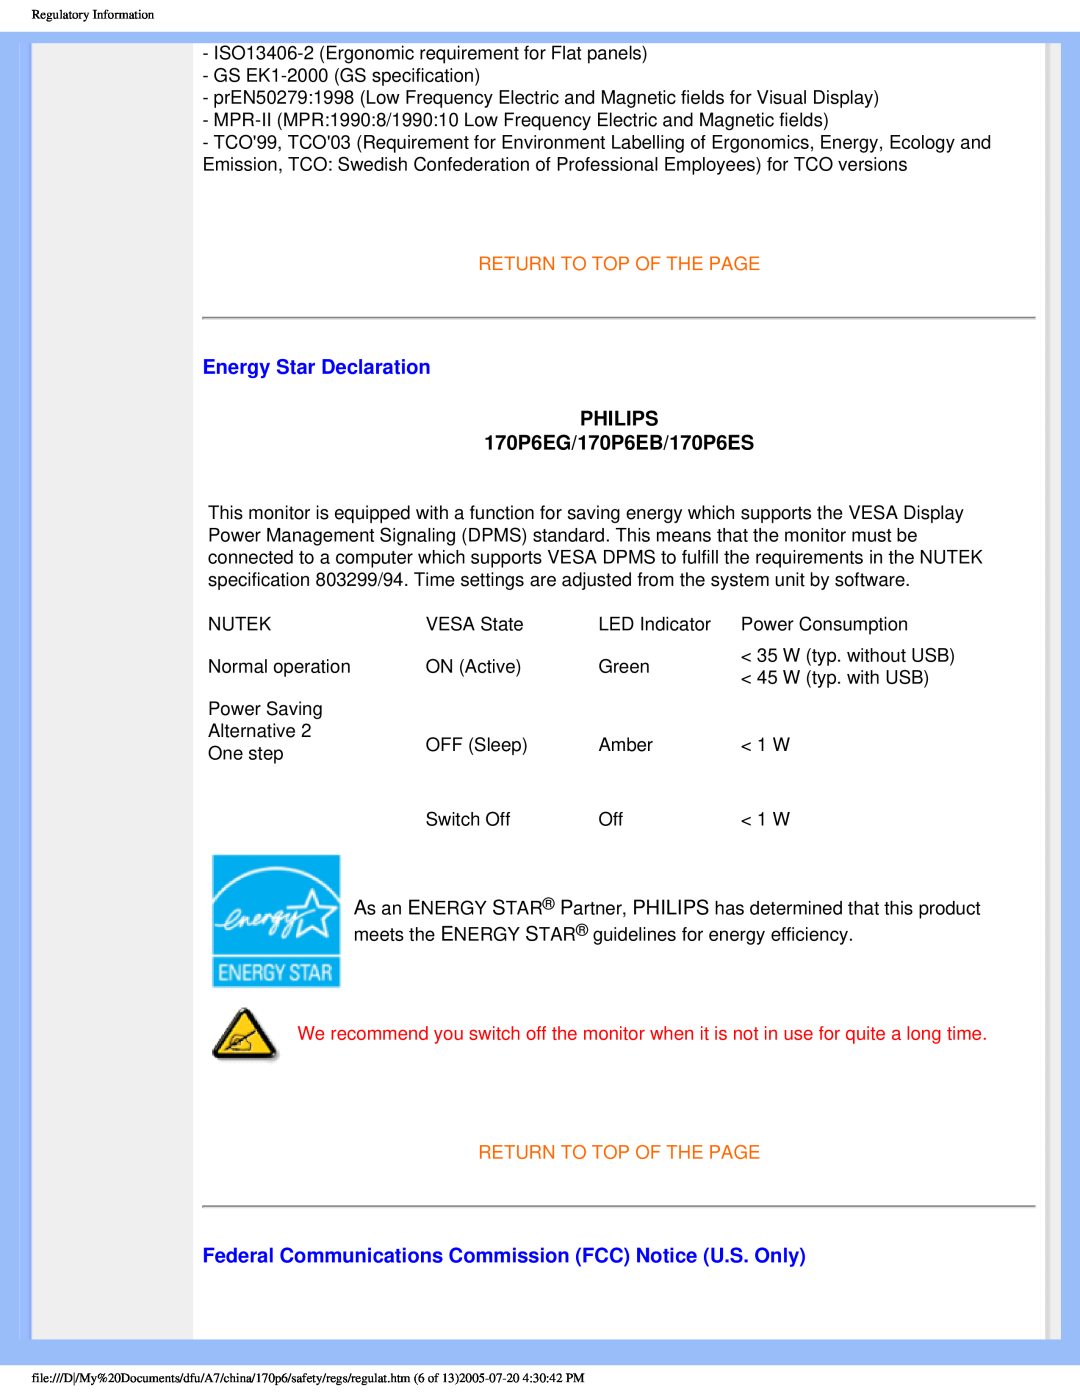 Philips 170p6 user manual Energy Star Declaration, PHILIPS 170P6EG/170P6EB/170P6ES, Return To Top Of The Page 